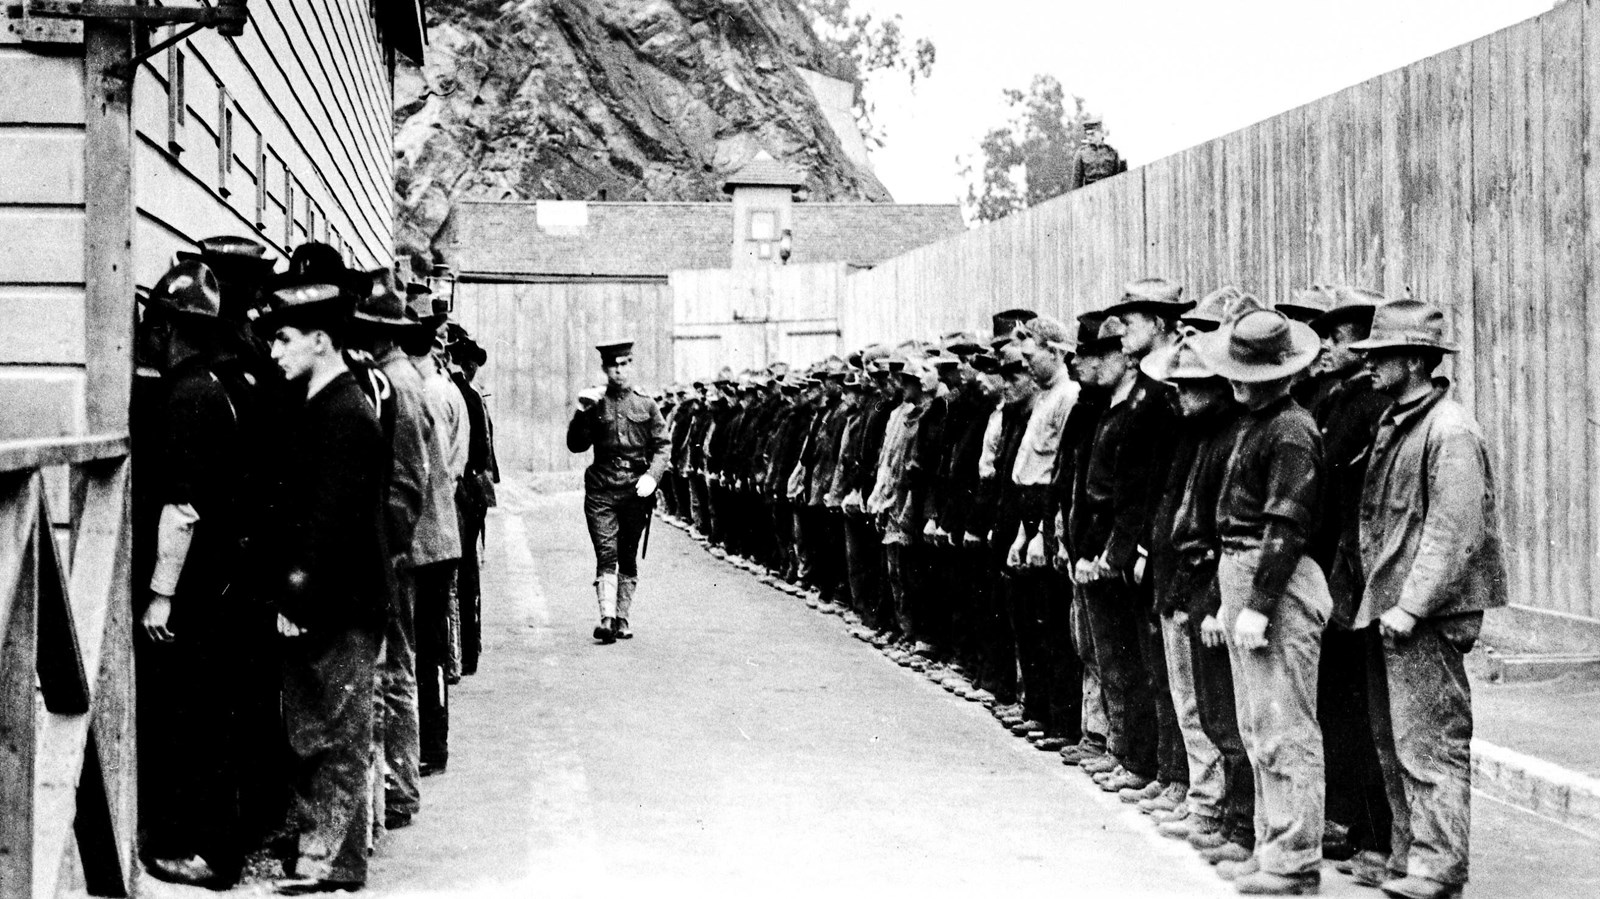 A guard walks past prisoners on either side of him, lined up in two long rows.